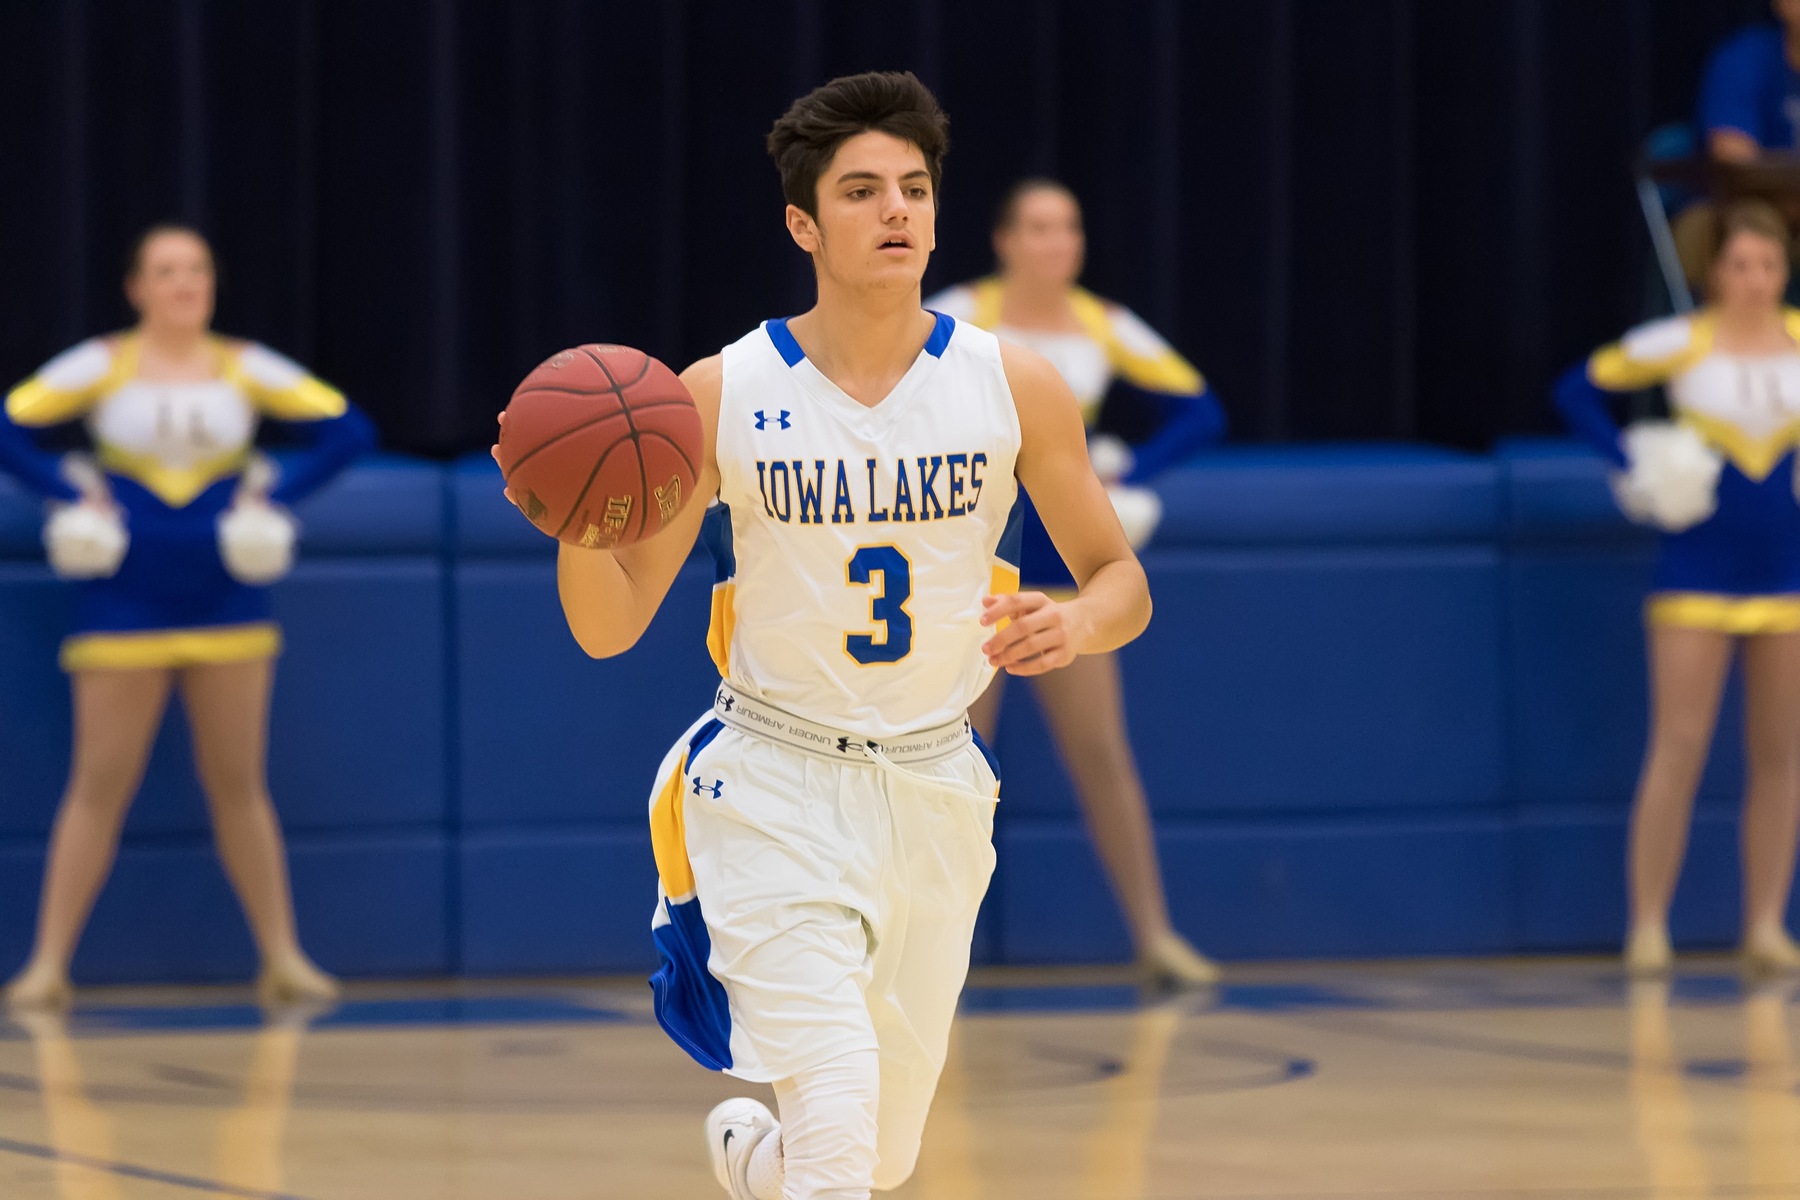 Lakers beat 17th ranked DMACC 85-80